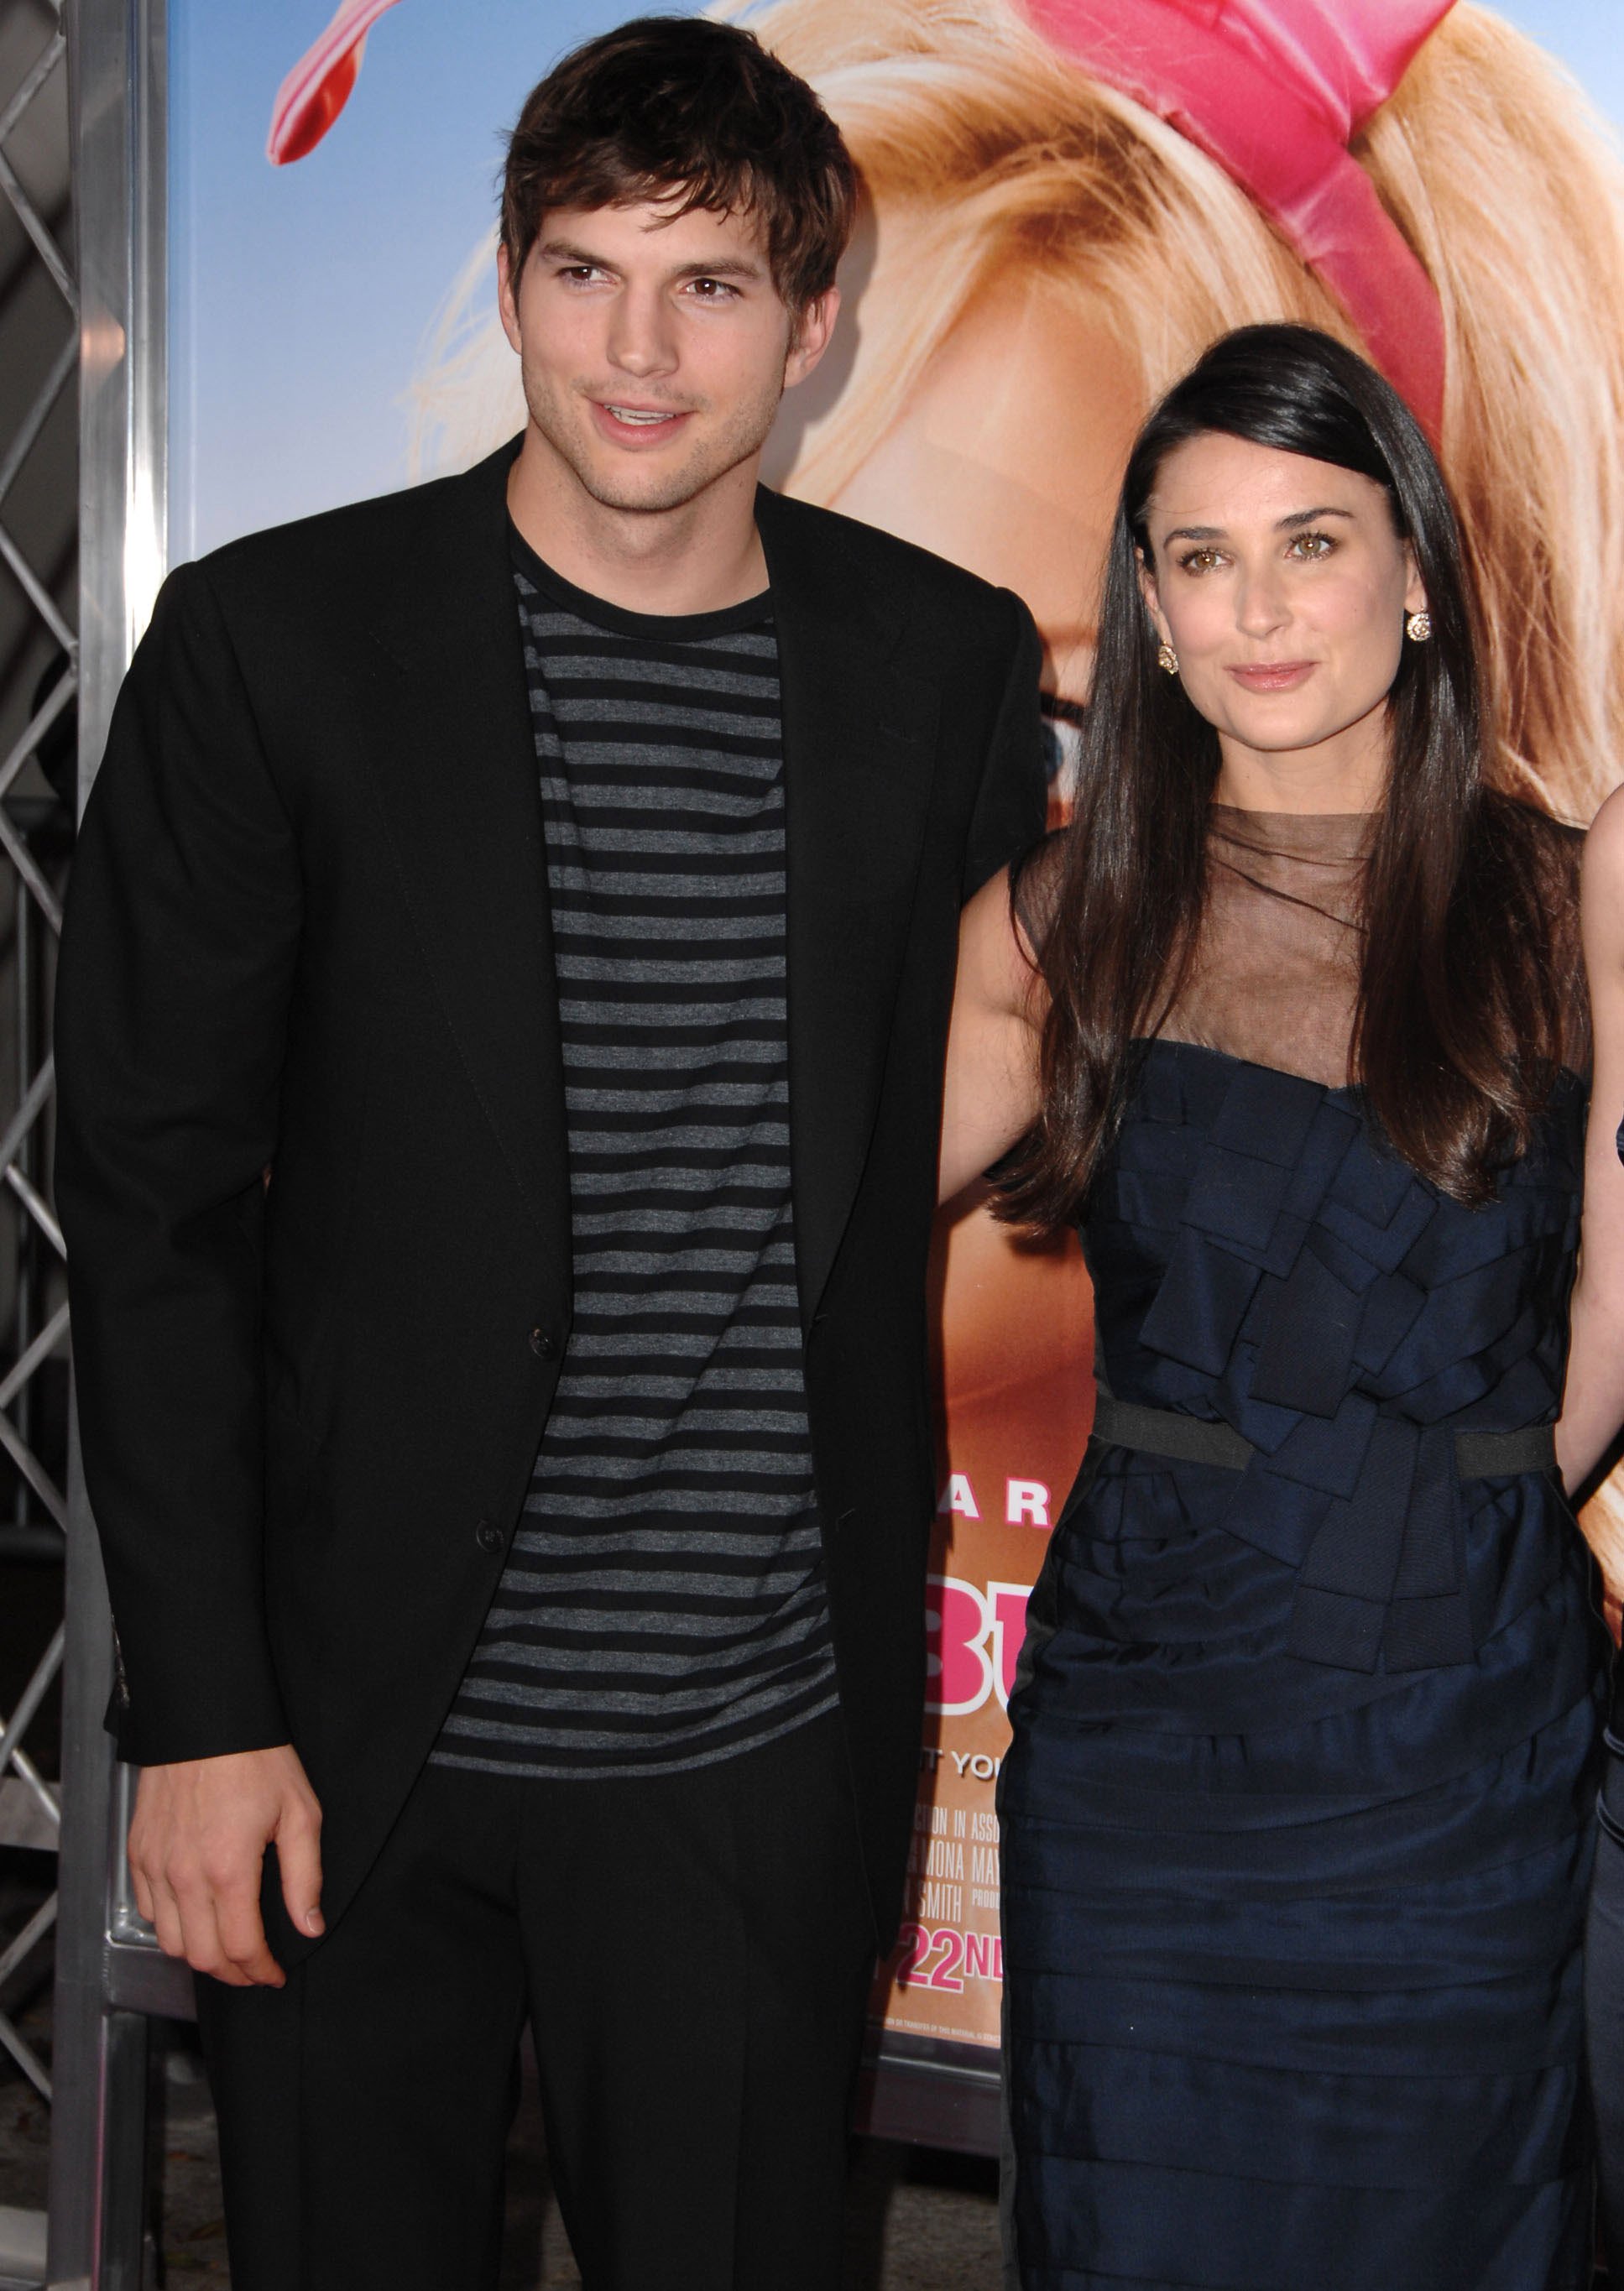 Actor Ashton Kutcher and actress Demi Moore arrive at the premiere of "House Bunny" at the Mann Village Theatre on August 14, 2008 in Los Angeles, California ┃Source: Getty Images